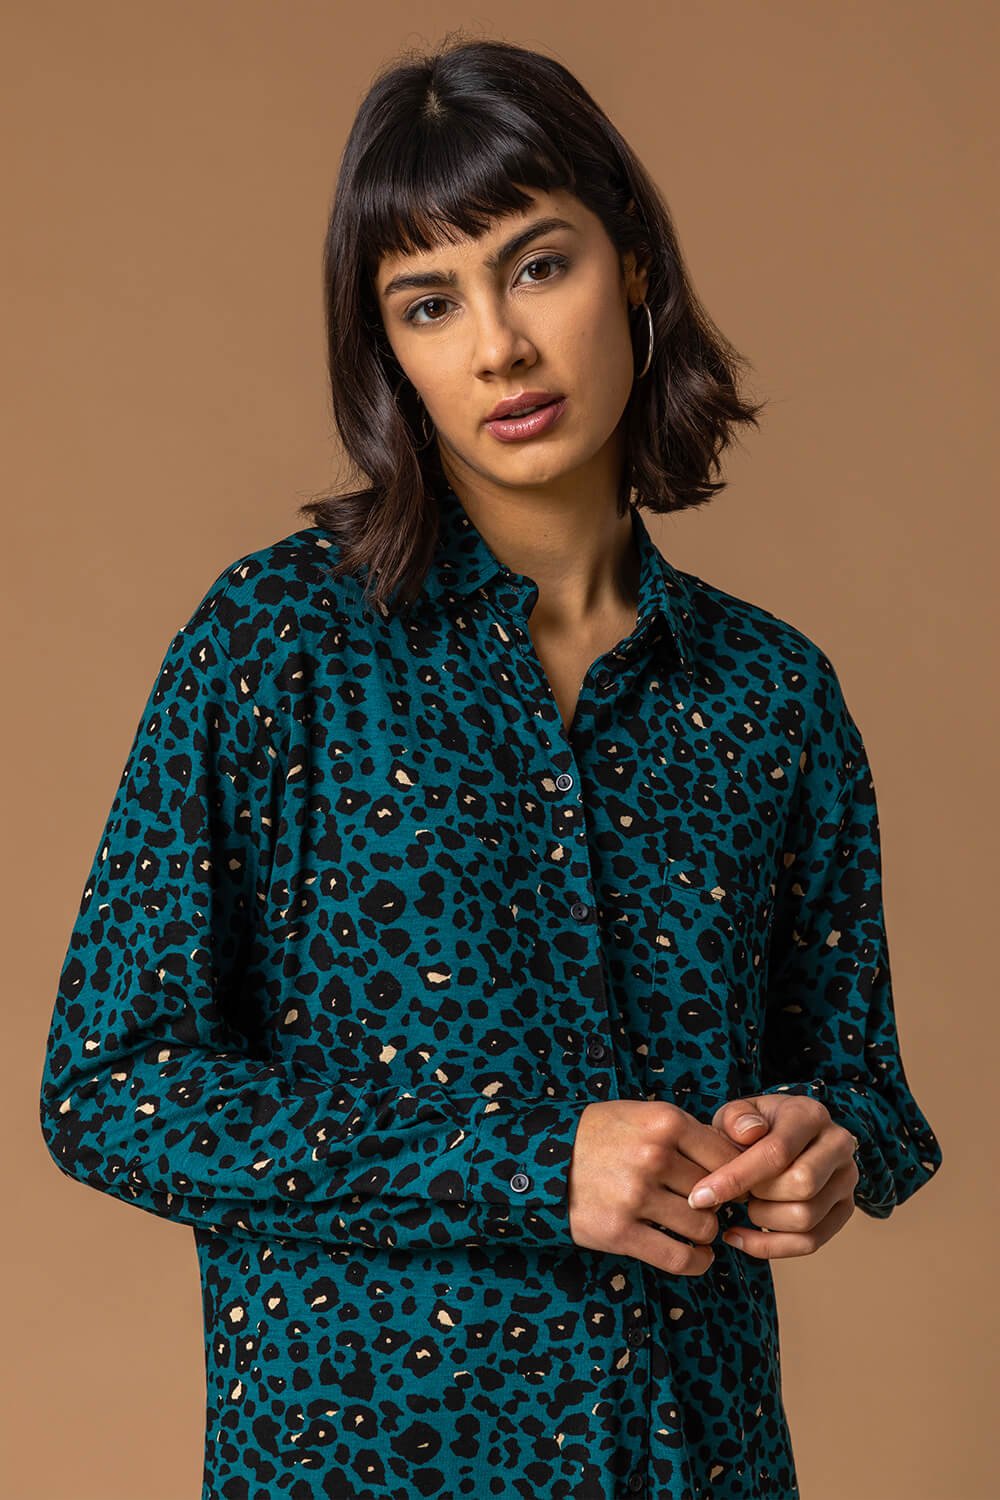 Teal Animal Print Jersey Buttoned Shirt, Image 4 of 4